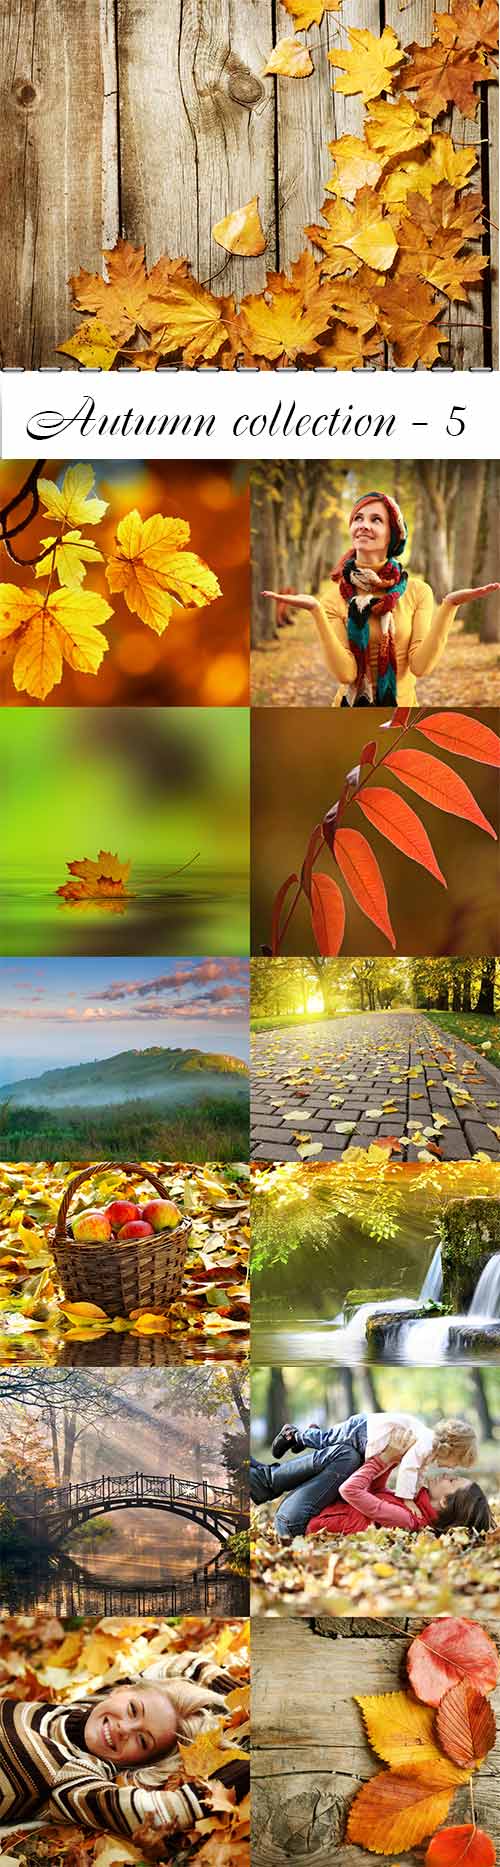 Autumn collection raster graphics - 5